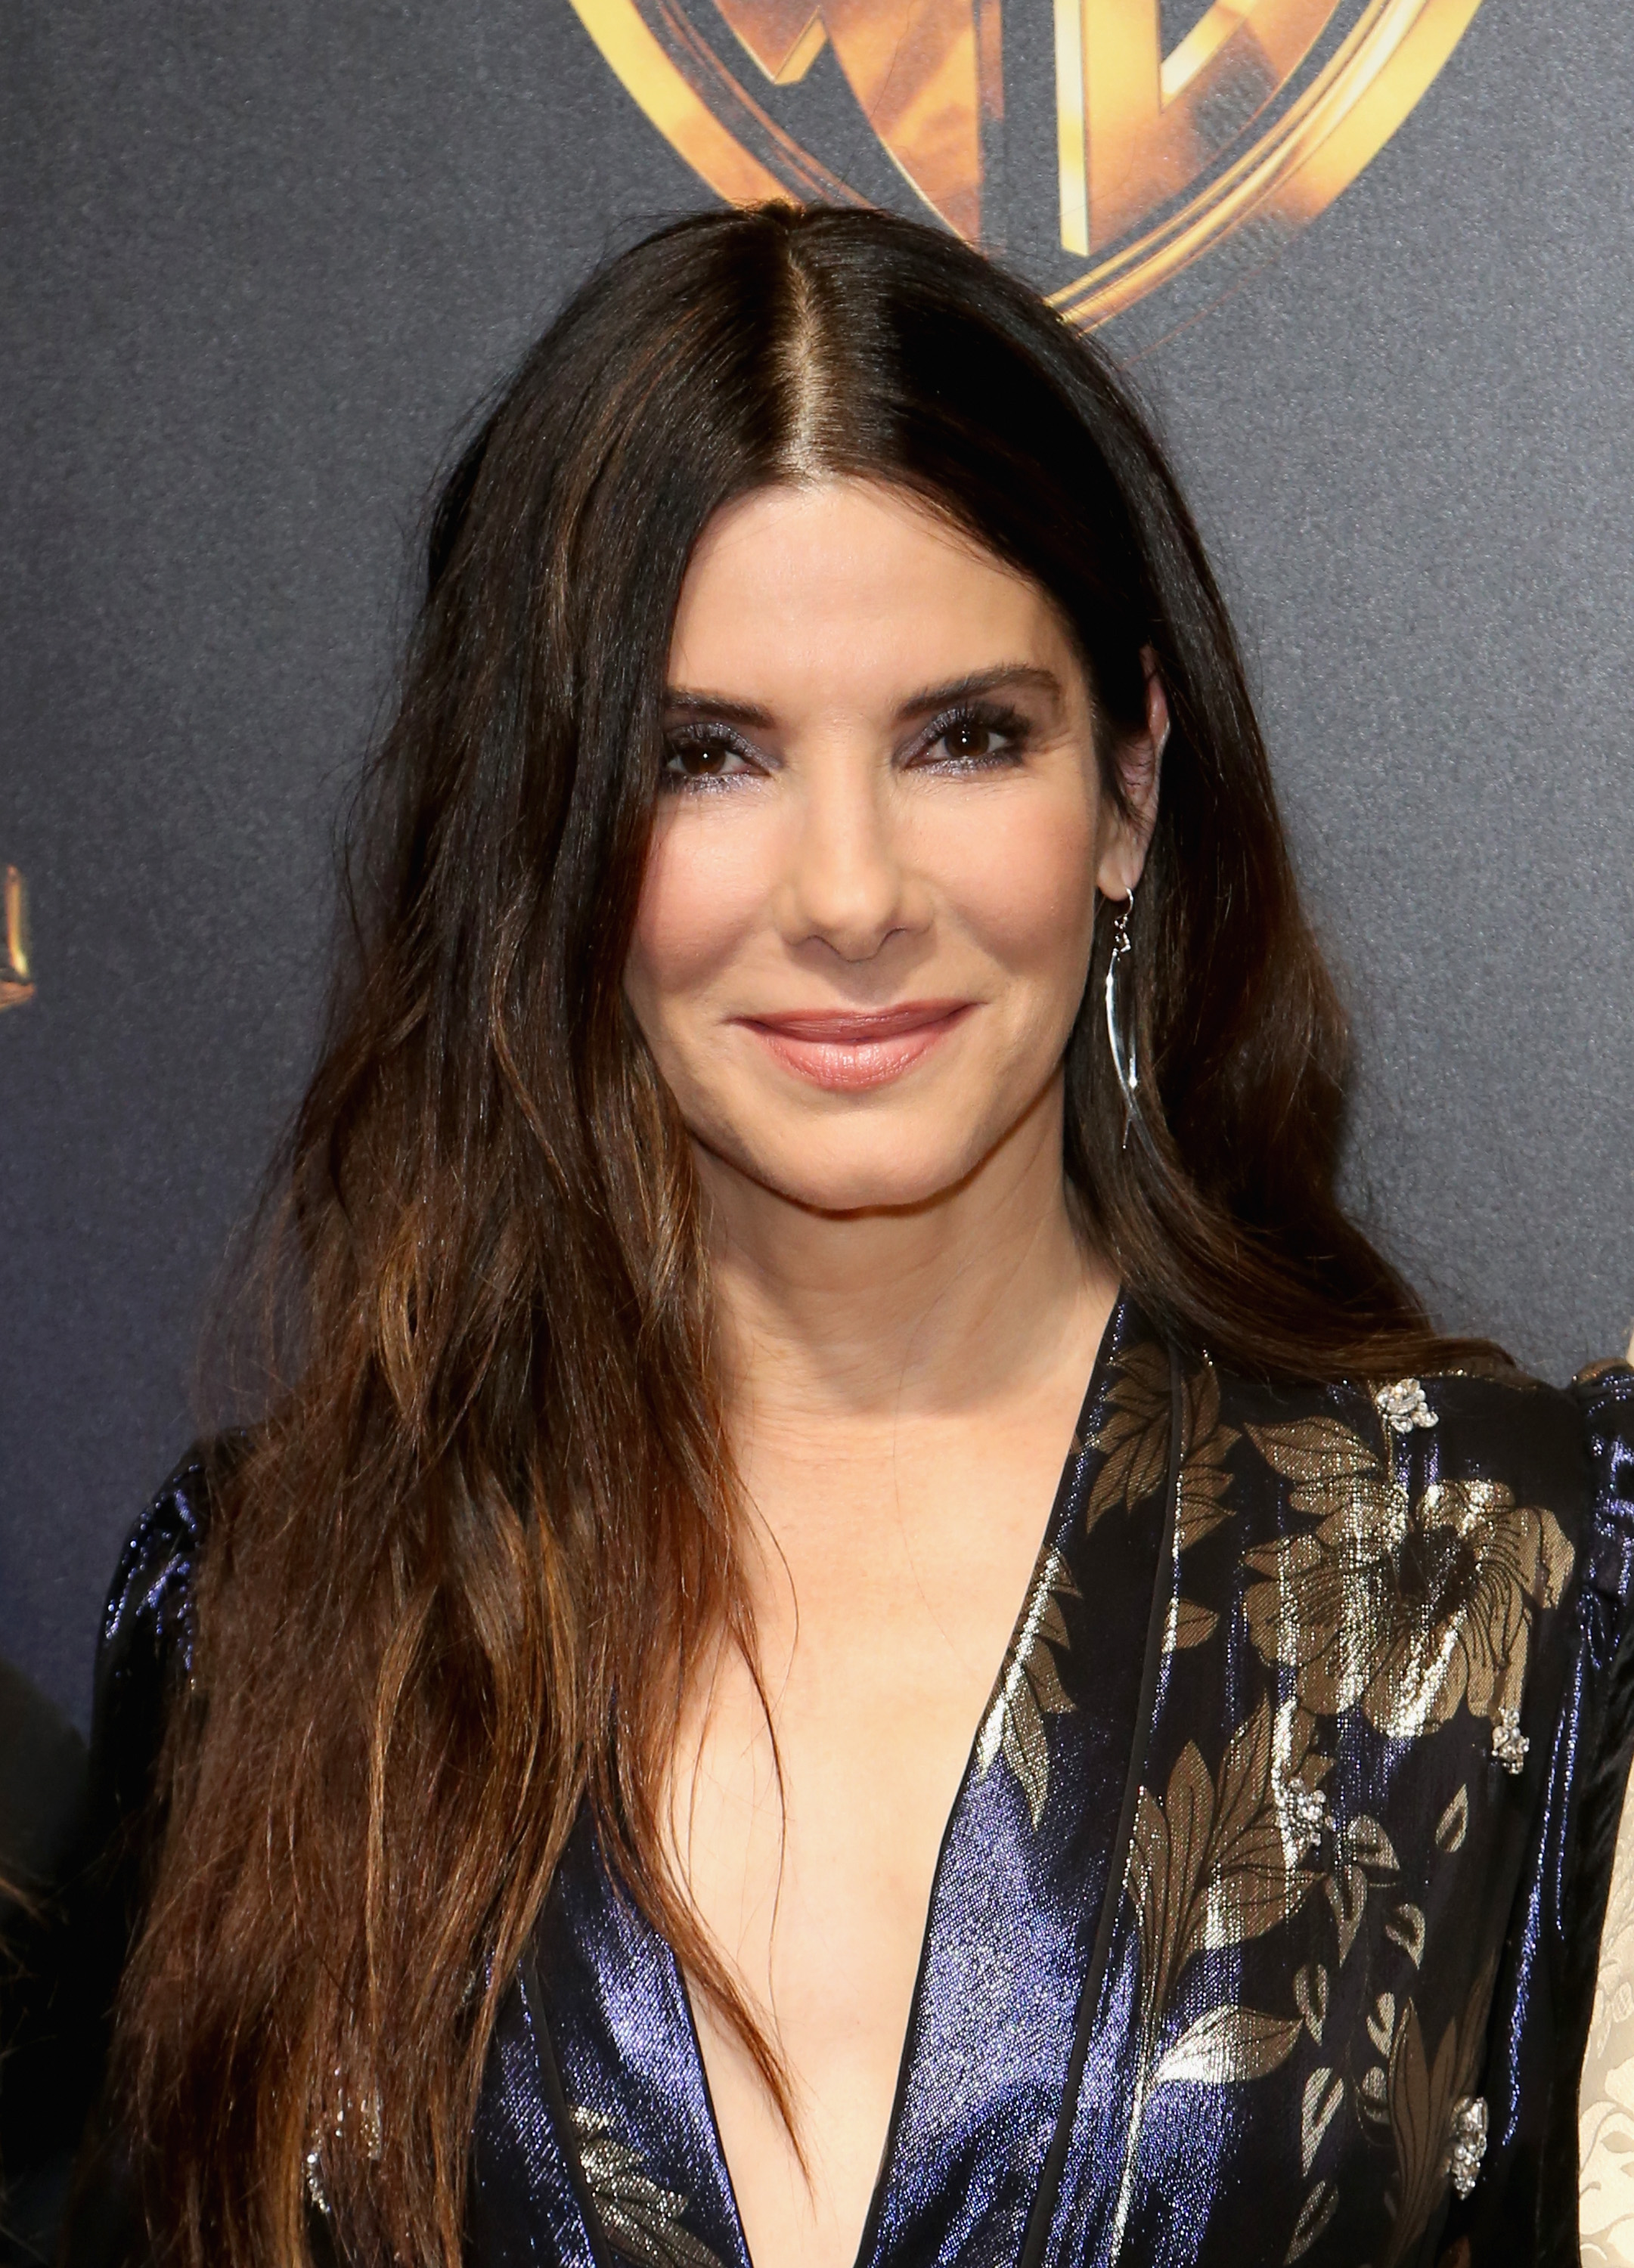 Actress Sandra Bullock on April 24, 2018 in Las Vegas, Nevada | Source: Getty Images